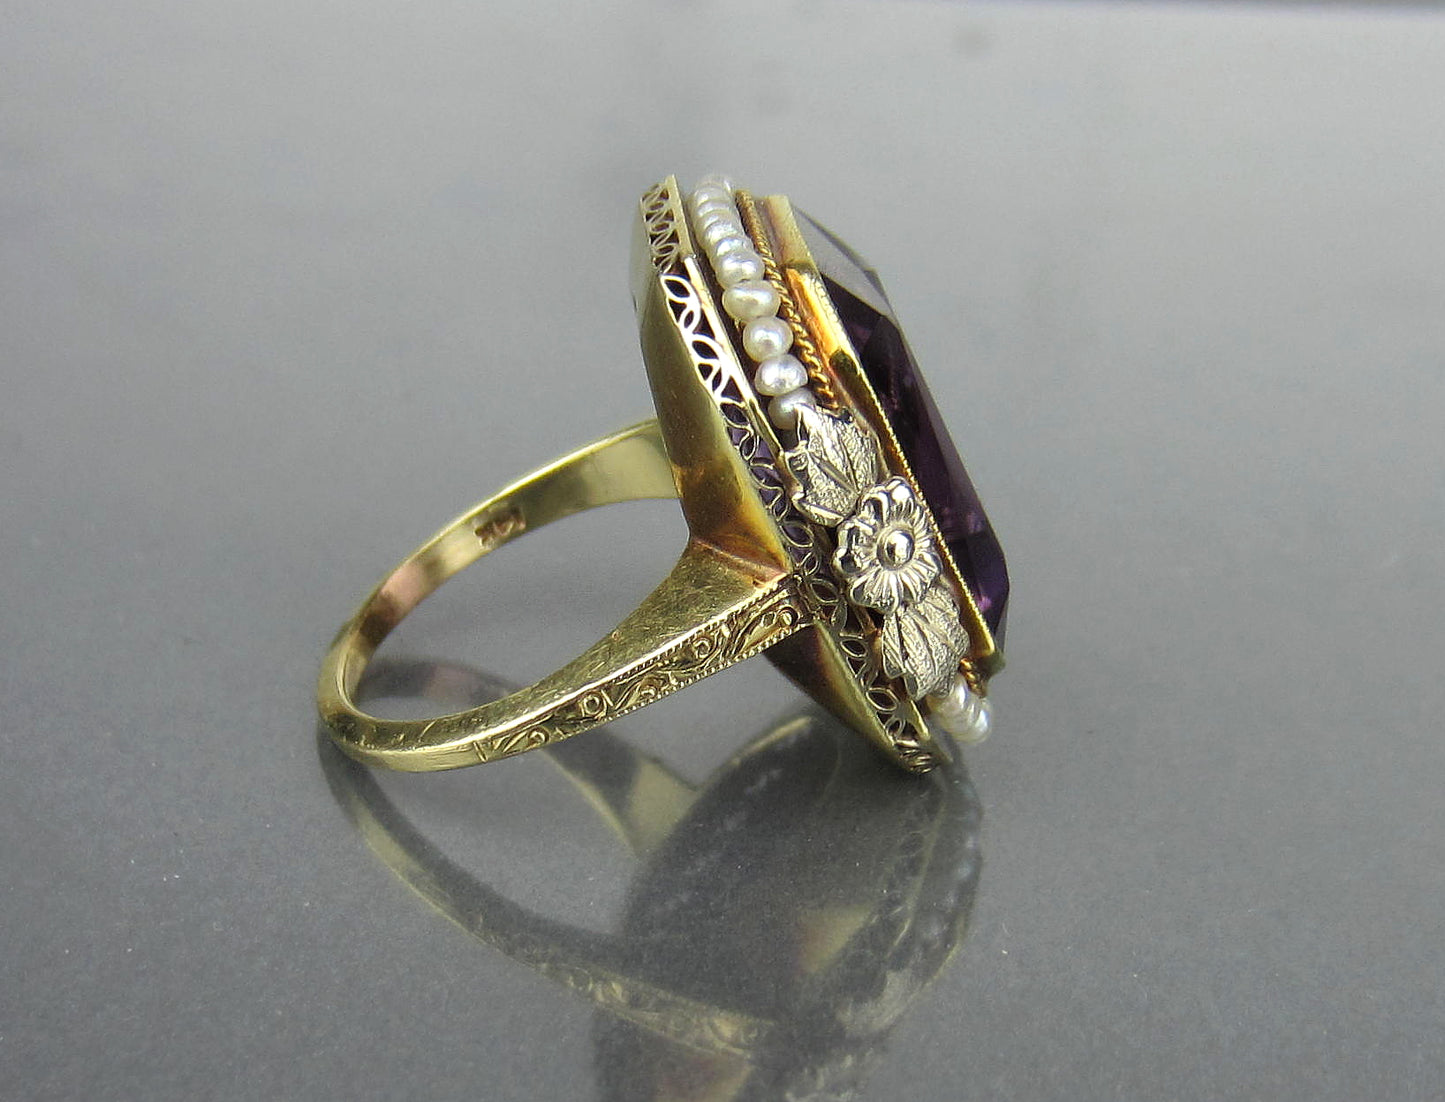 SOLD--Late Edwardian Amethyst and Seed Pearl Ring 14k c. 1915